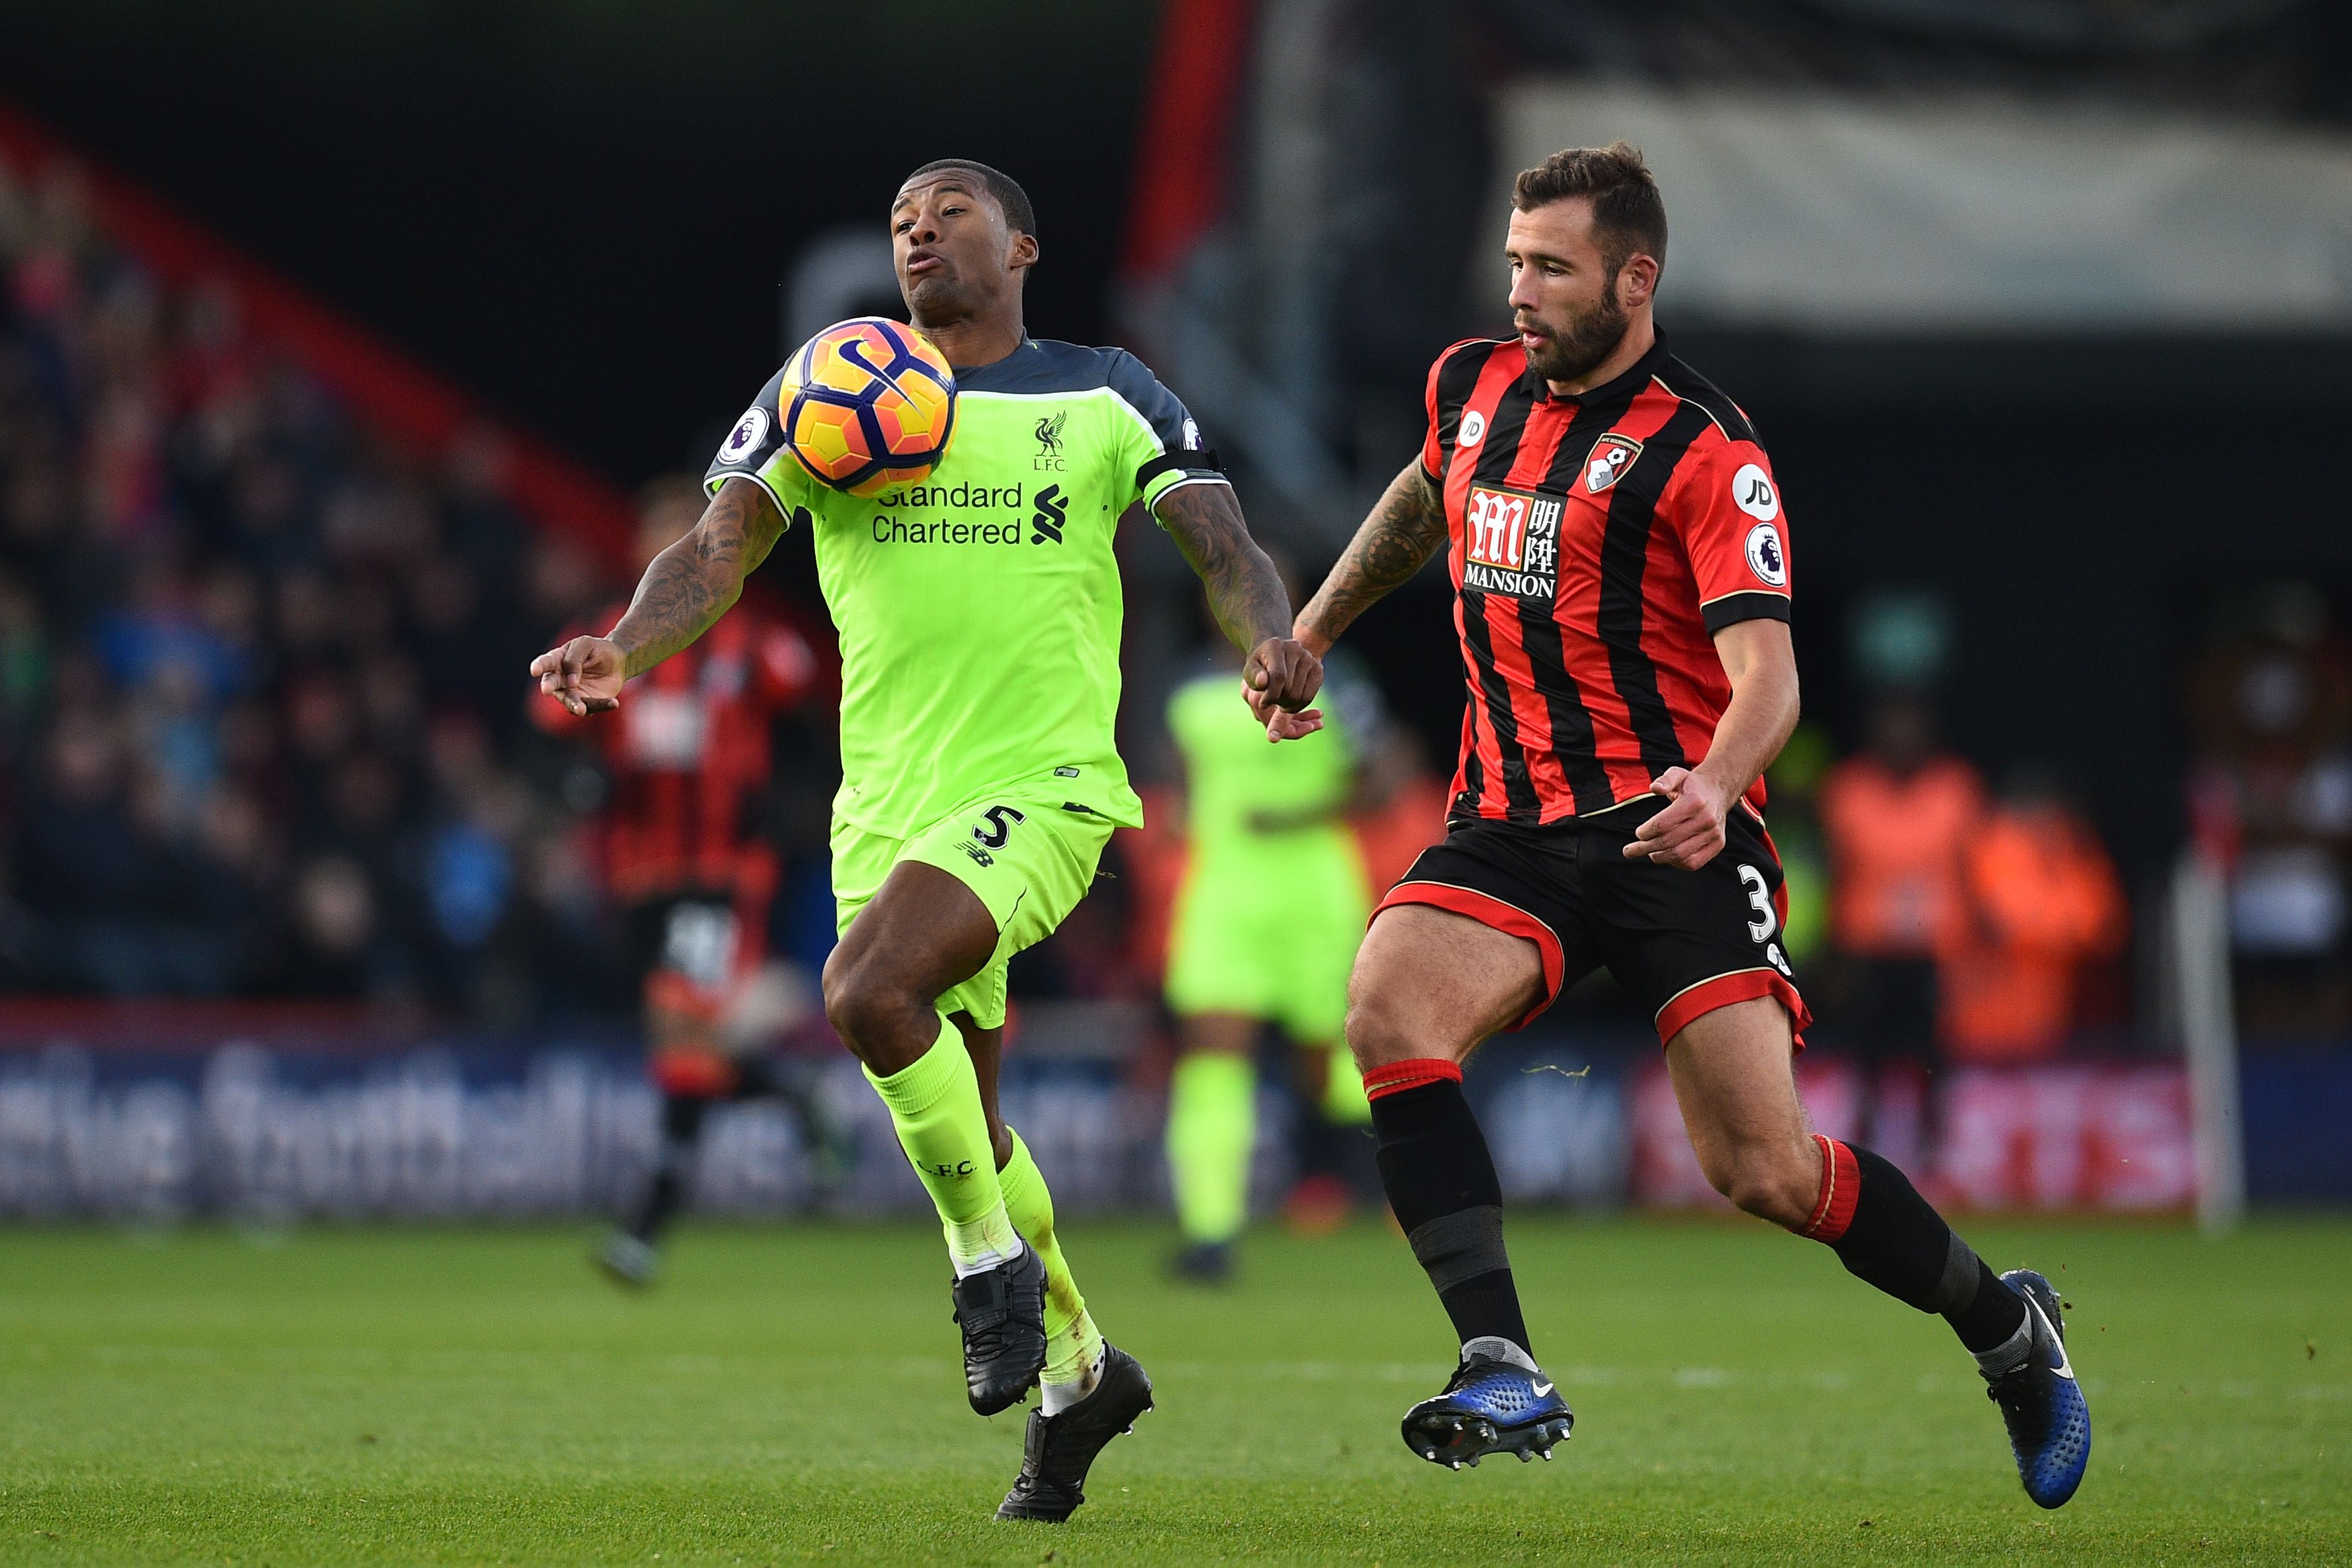 Liverpool's Dutch midfielder Georginio Wijnaldum vies with Bournemouth's English defender Steve Cook (R) during the English Premier League football match between Bournemouth and Liverpool at the Vitality Stadium in Bournemouth, southern England on December 4, 2016. / AFP / Glyn KIRK / RESTRICTED TO EDITORIAL USE. No use with unauthorized audio, video, data, fixture lists, club/league logos or 'live' services. Online in-match use limited to 75 images, no video emulation. No use in betting, games or single club/league/player publications.  /         (Photo credit should read GLYN KIRK/AFP/Getty Images)